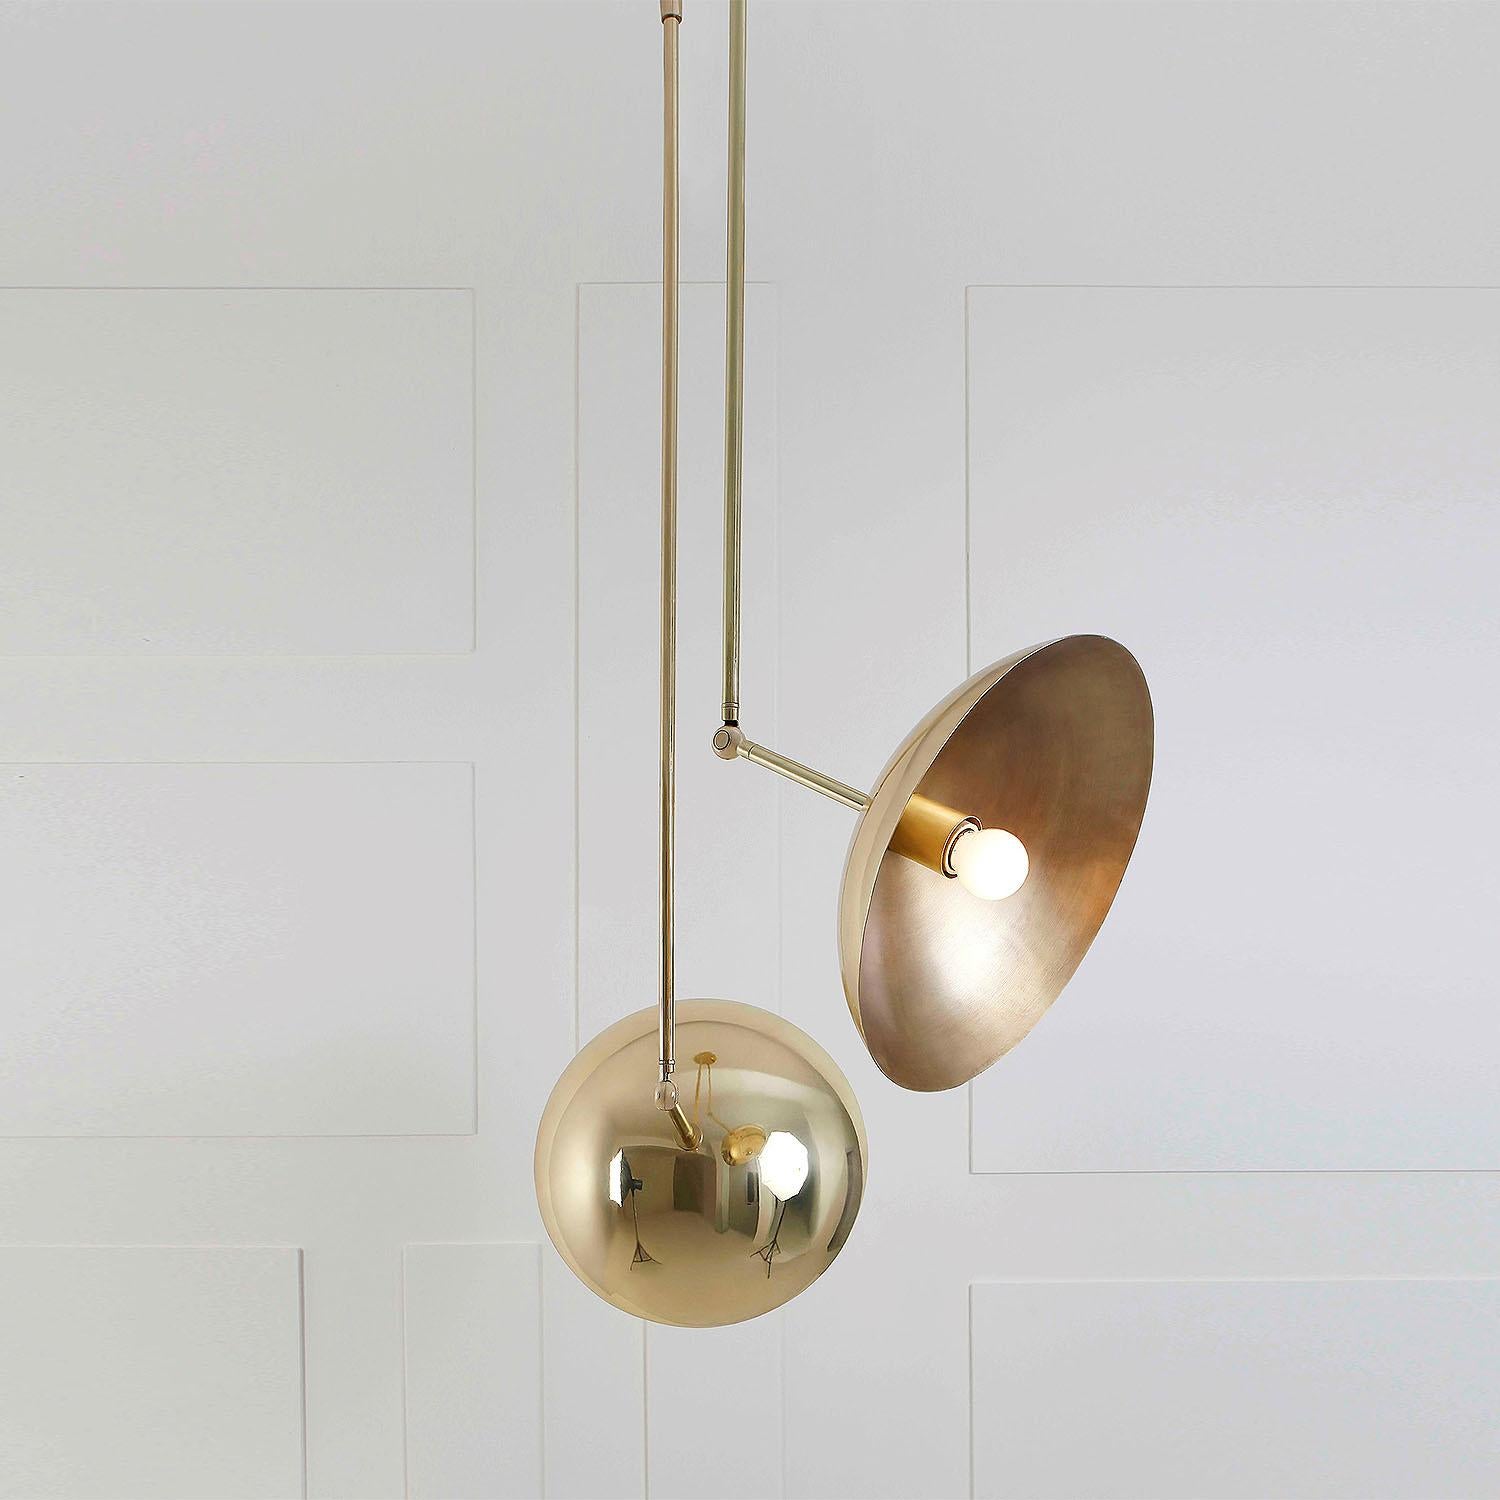 Contemporary Sculpted Brass Pendant, Tango Two Dome by Paul Matter

Tango is born from playful experimentation with vintage lighting components.
Burnt, aged brass and etched glass are combined to create lighting fixtures that fuse sculptural form